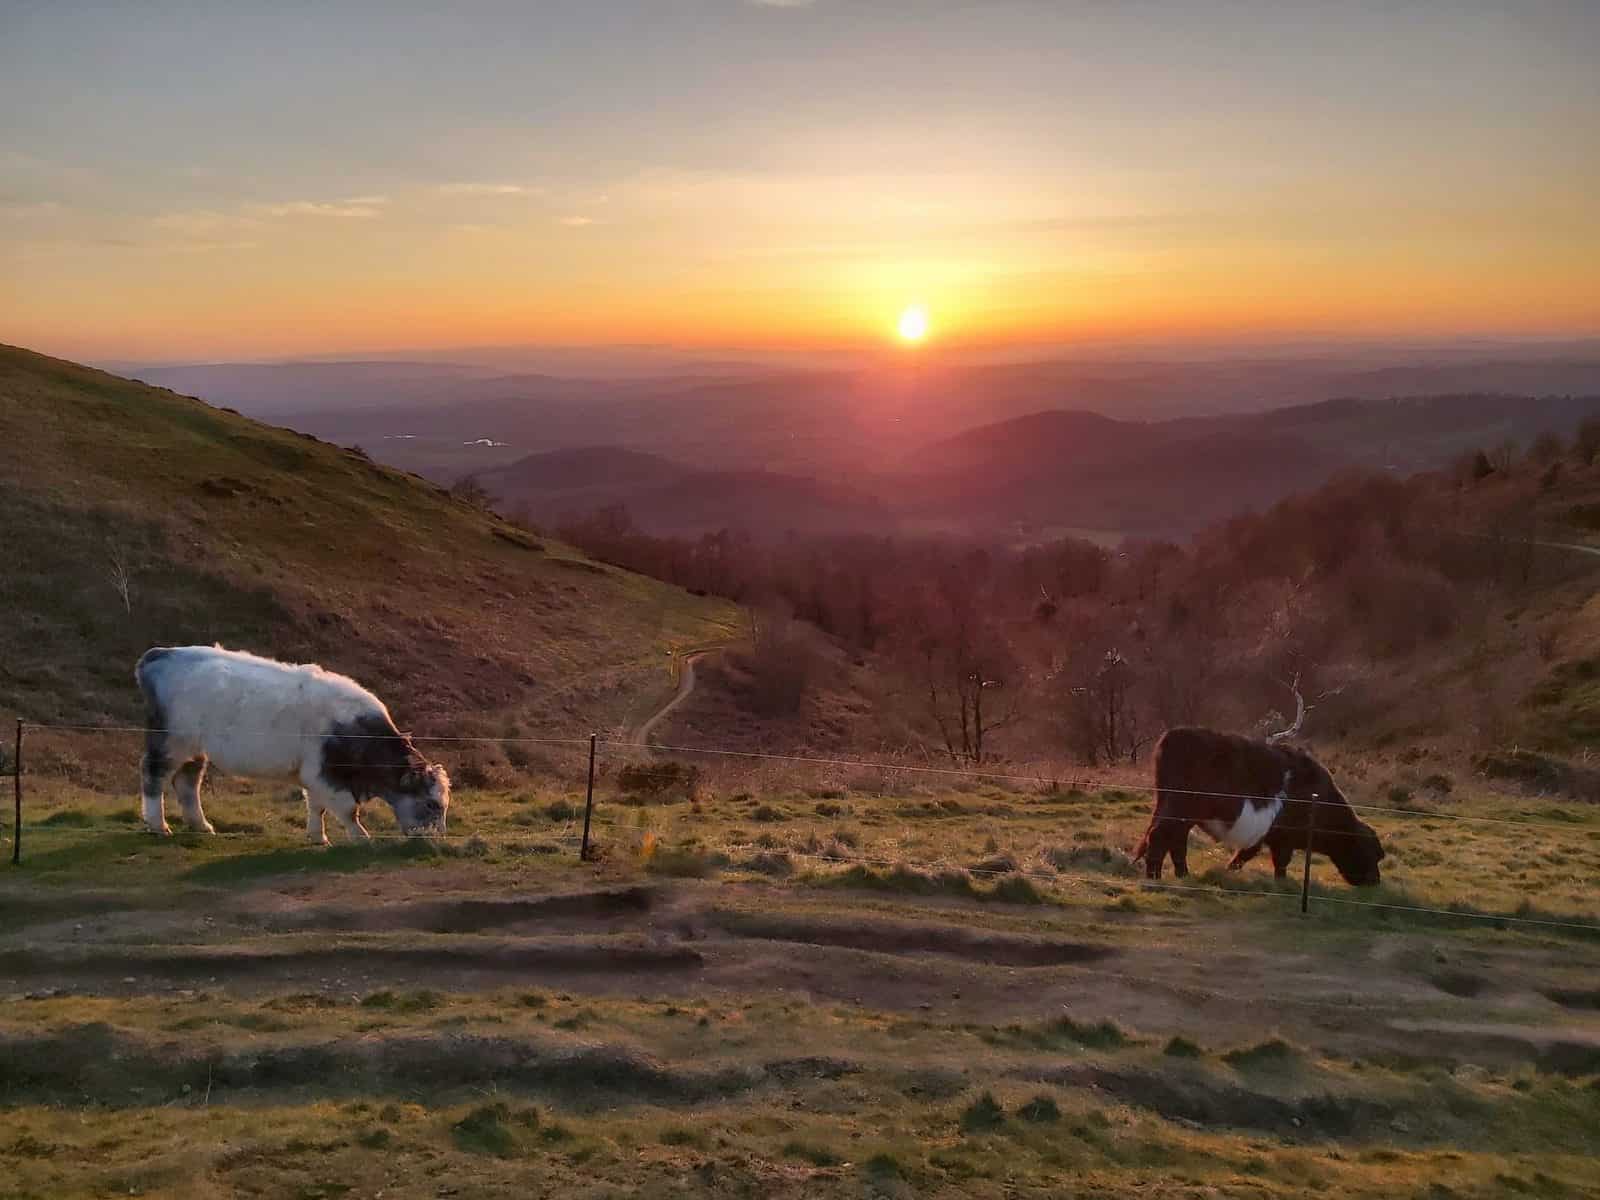 Malvern Hills at sunset with cattle grazing on the hillside